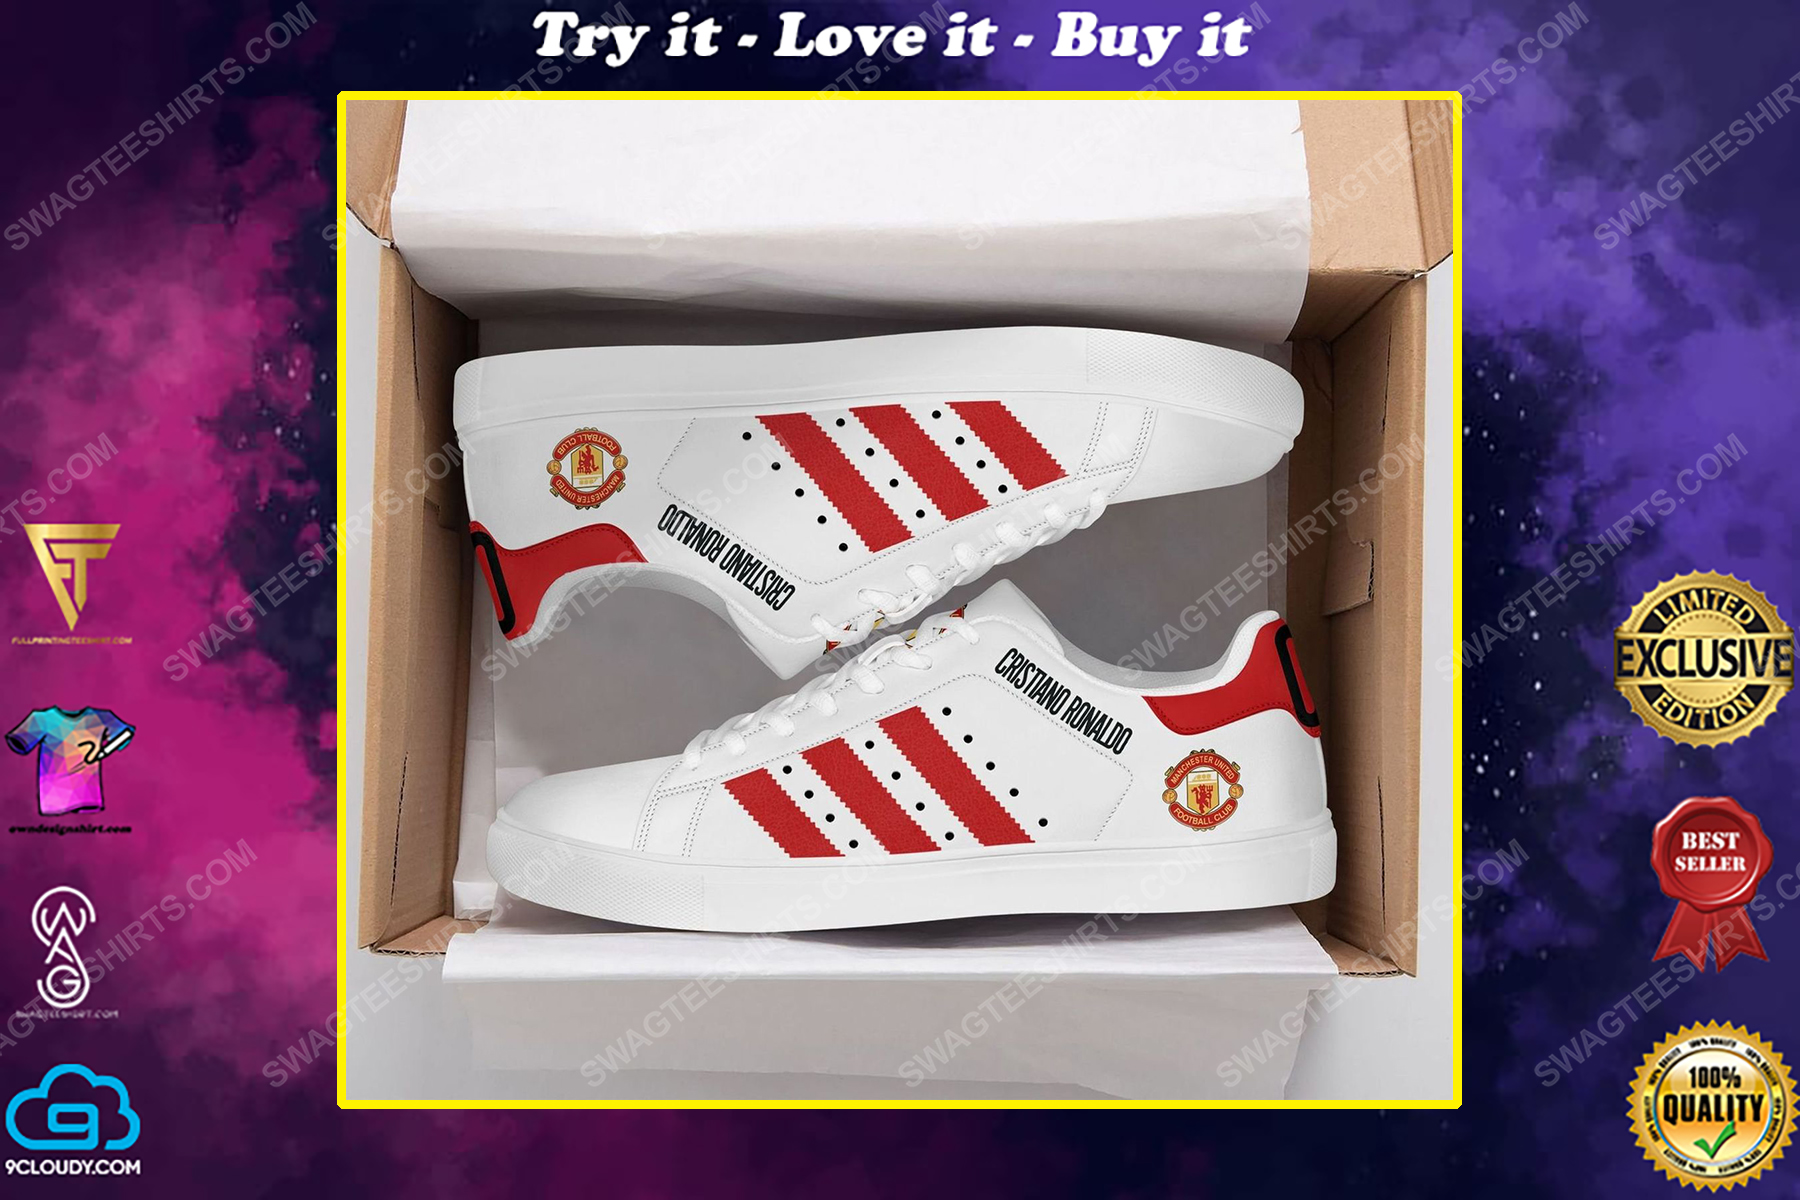 Manchester united cr7 stan smith shoes